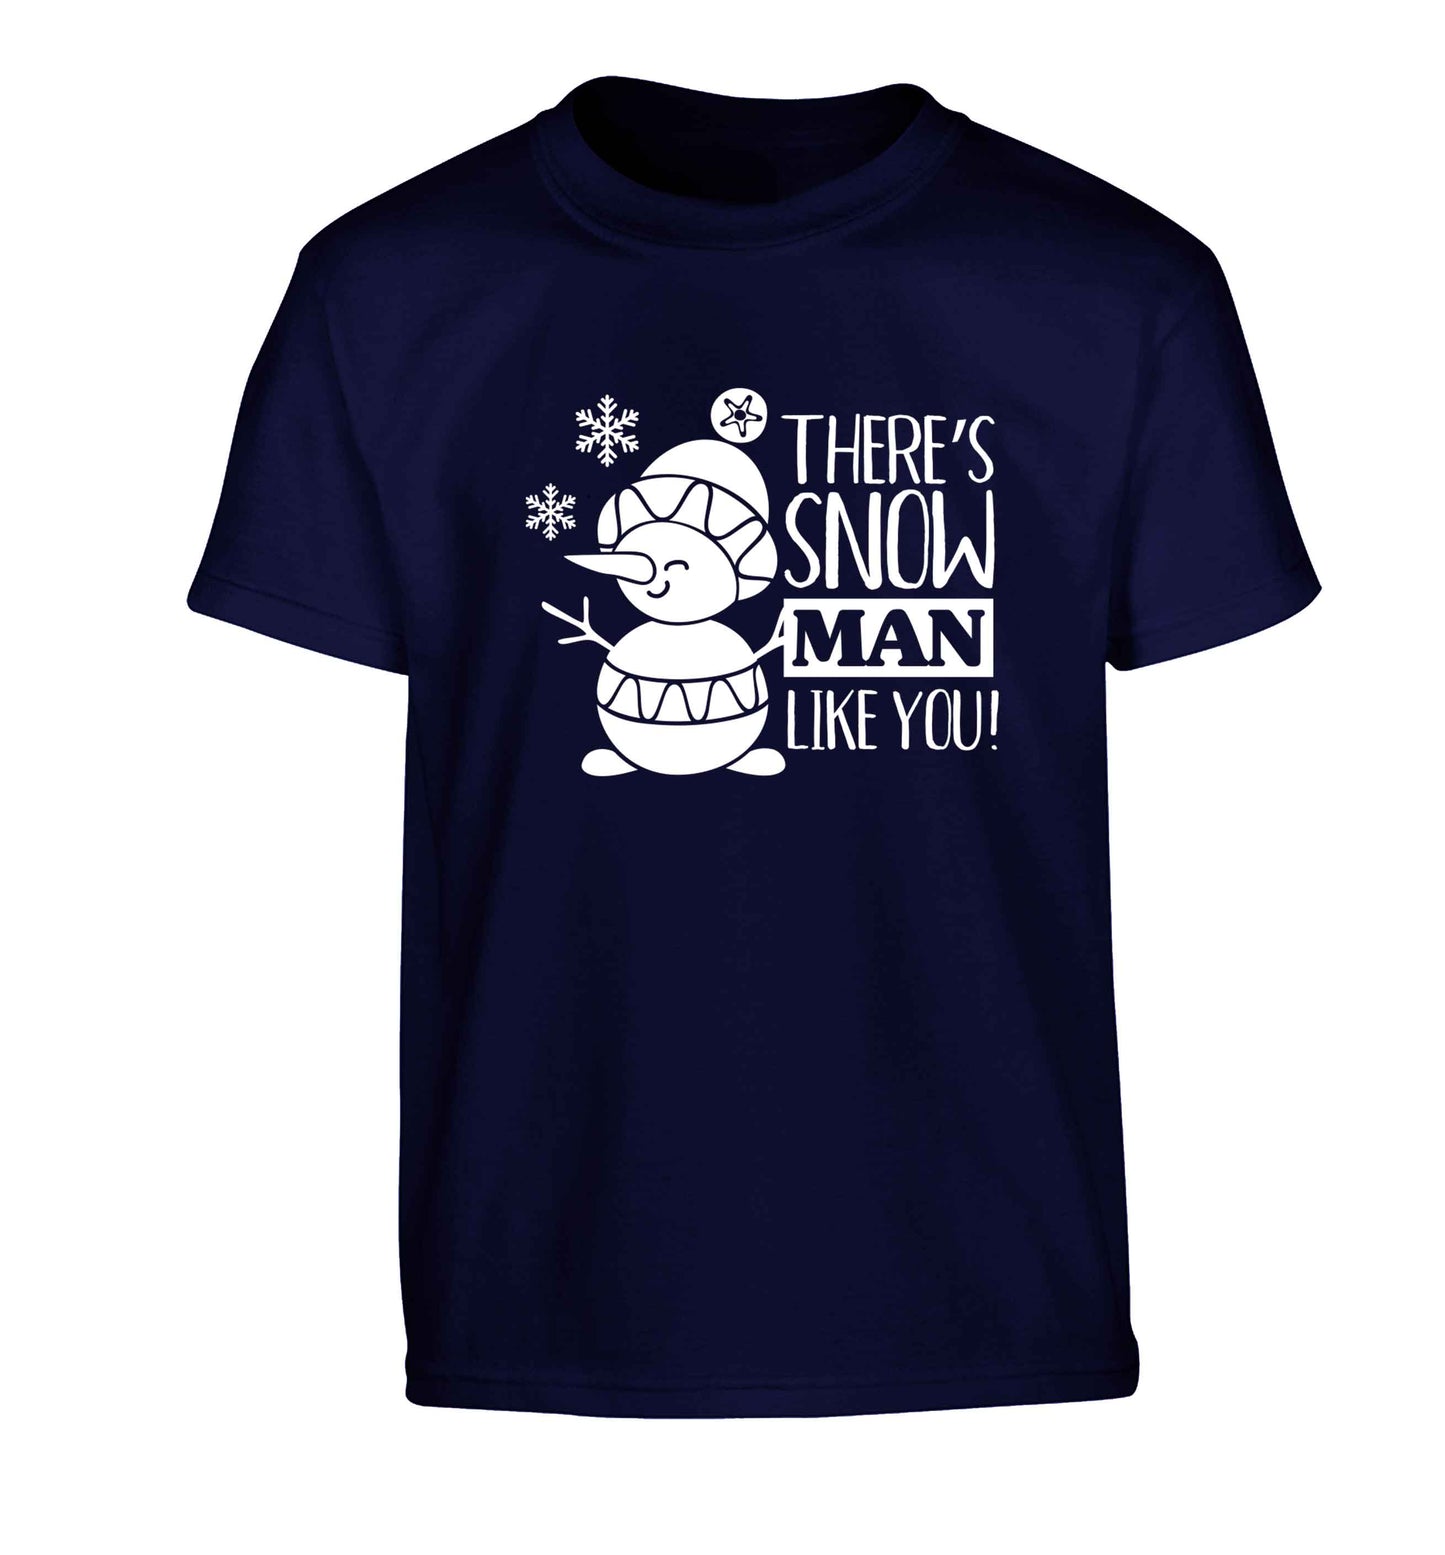 There's snow man like you Children's navy Tshirt 12-13 Years